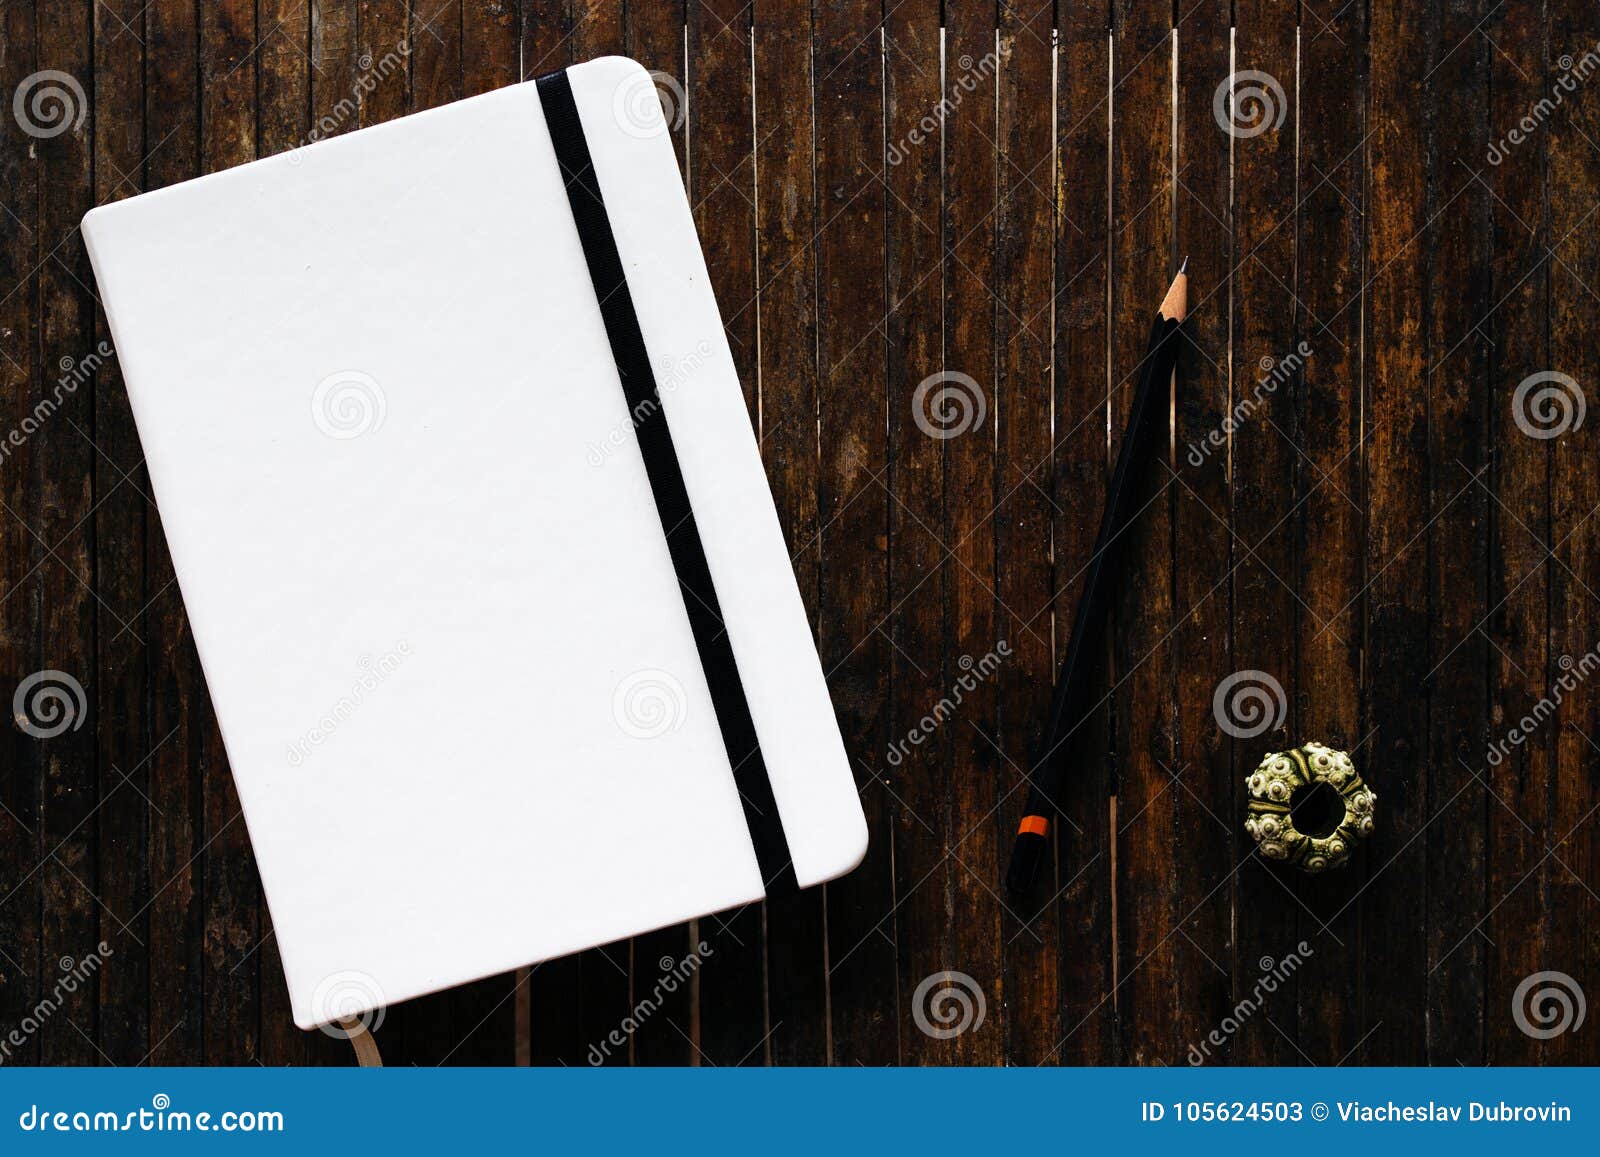 White Cover Sketchbook with Black Pencil on Rustic Wooden Table Flat Lay  Photo. Stock Image - Image of obsolete, place: 105624503